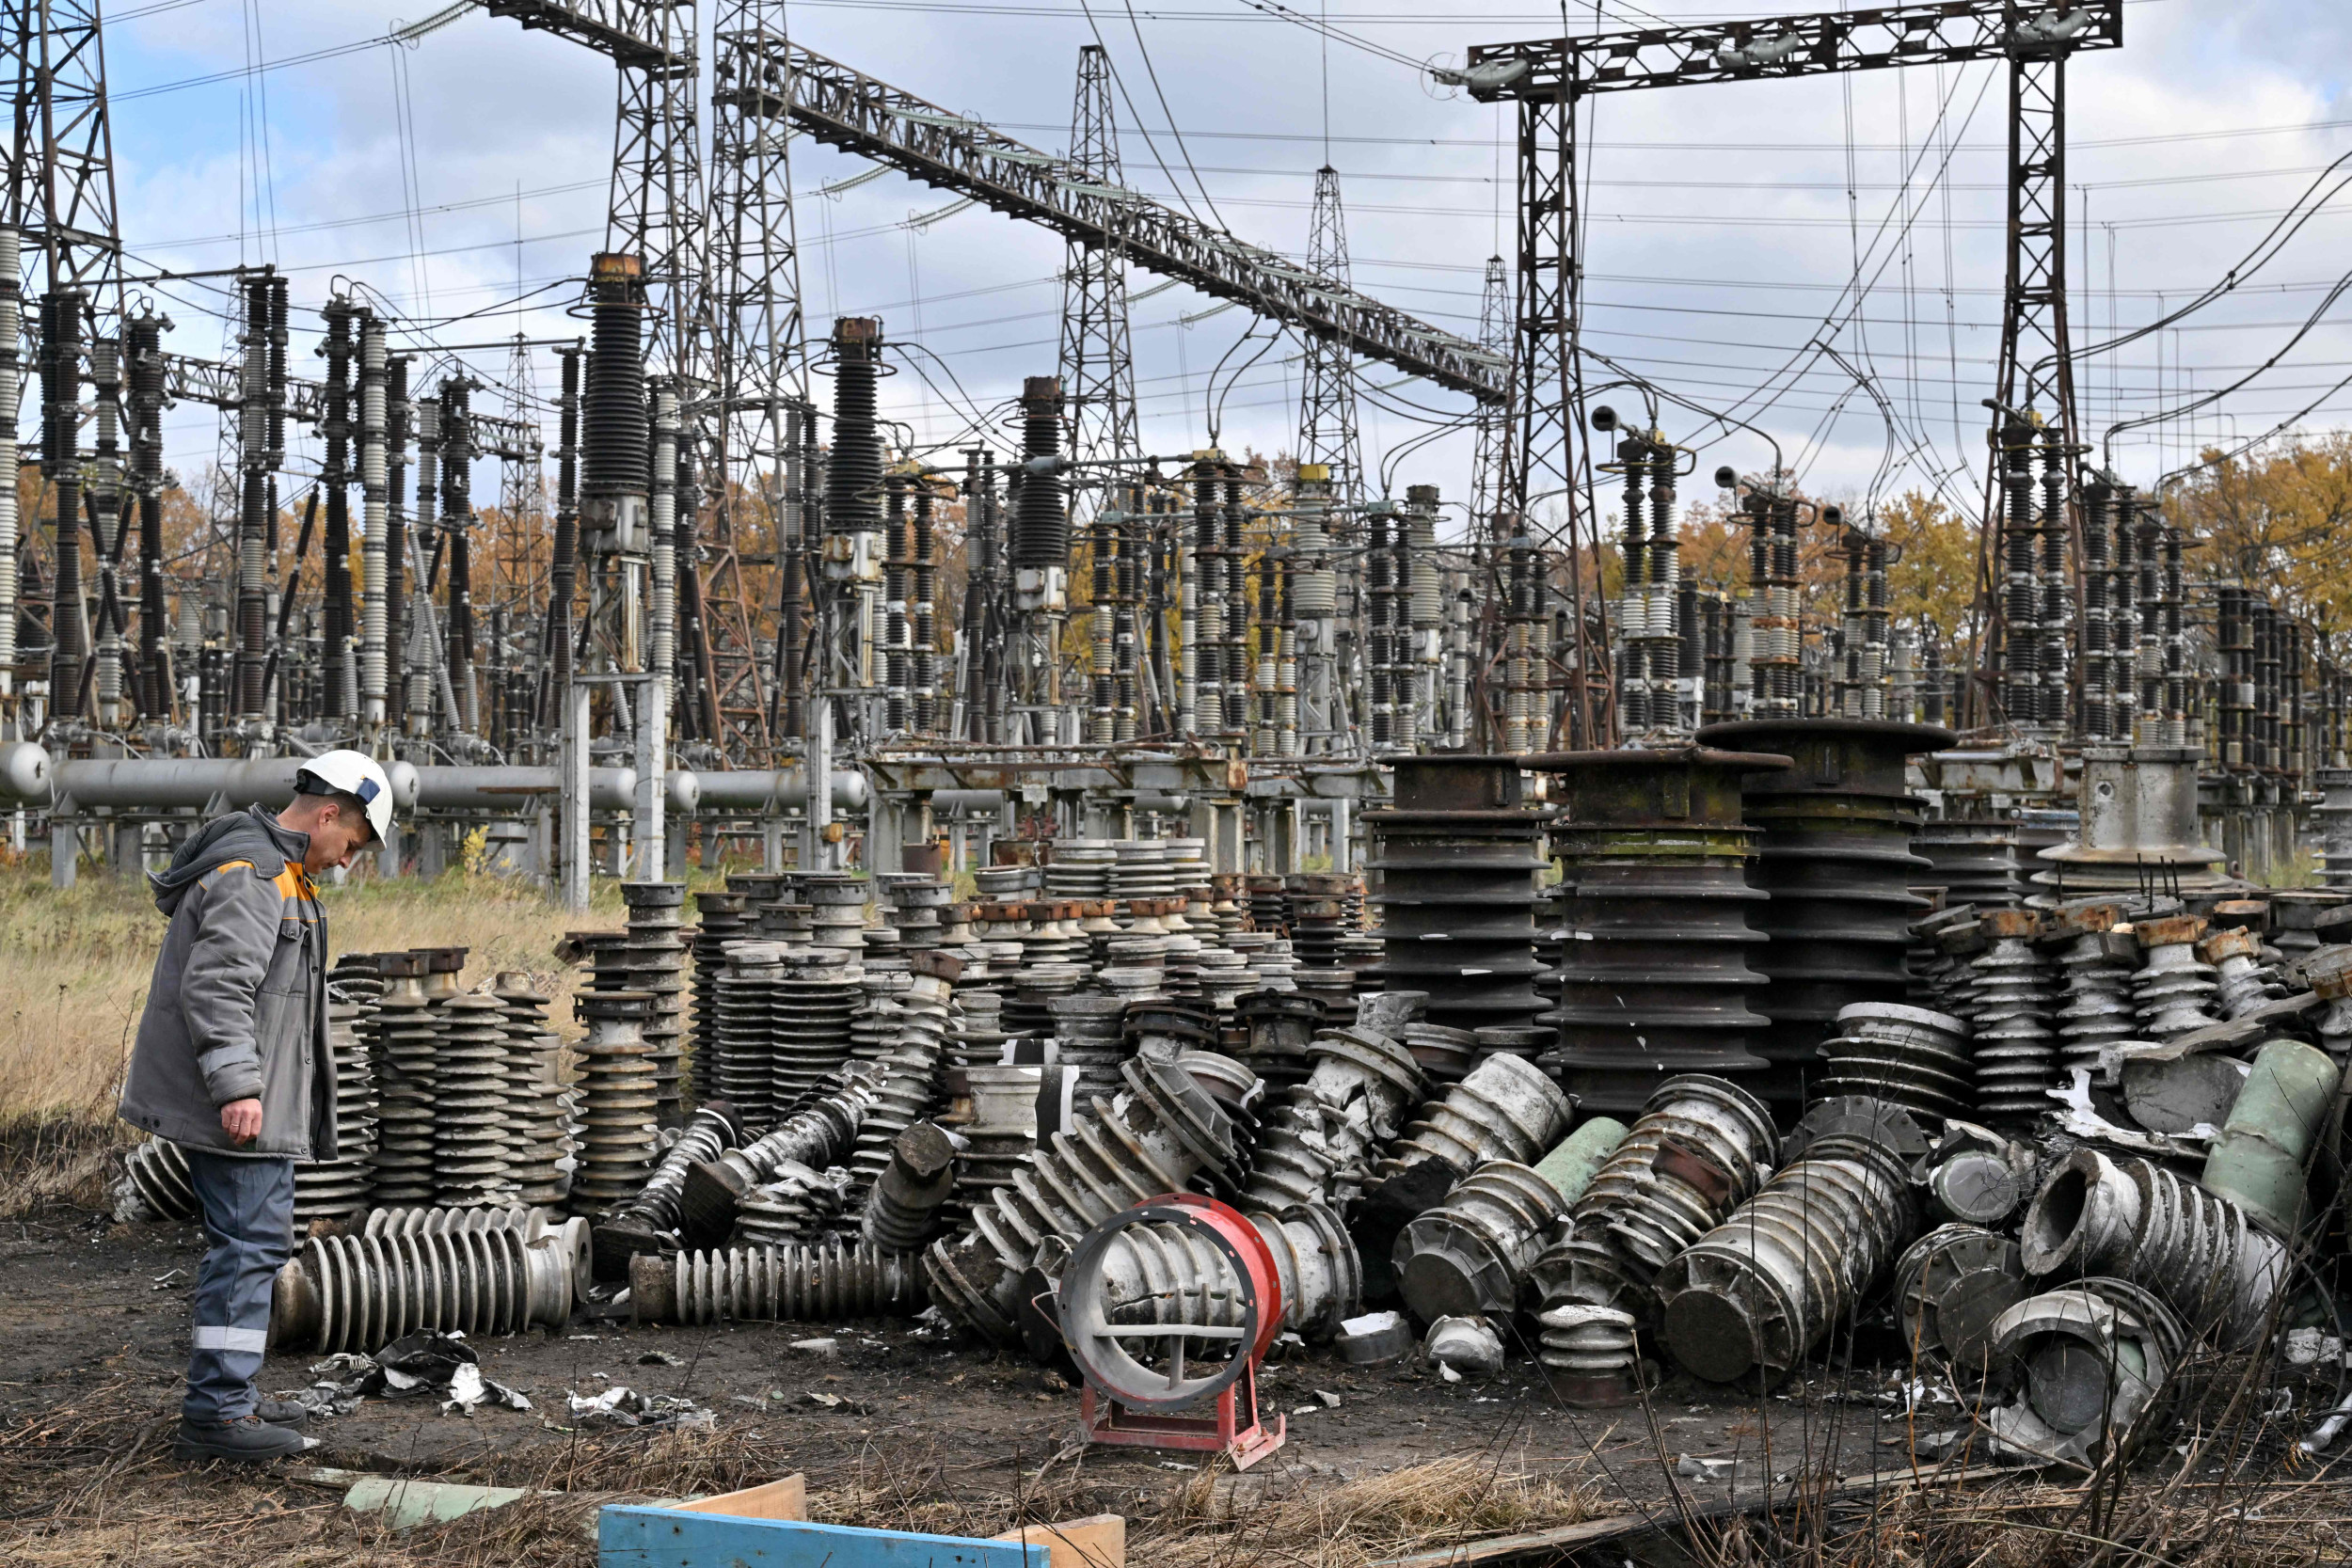 Ukraine Energy Giant Running Out of Equipment to Fix Power Outages